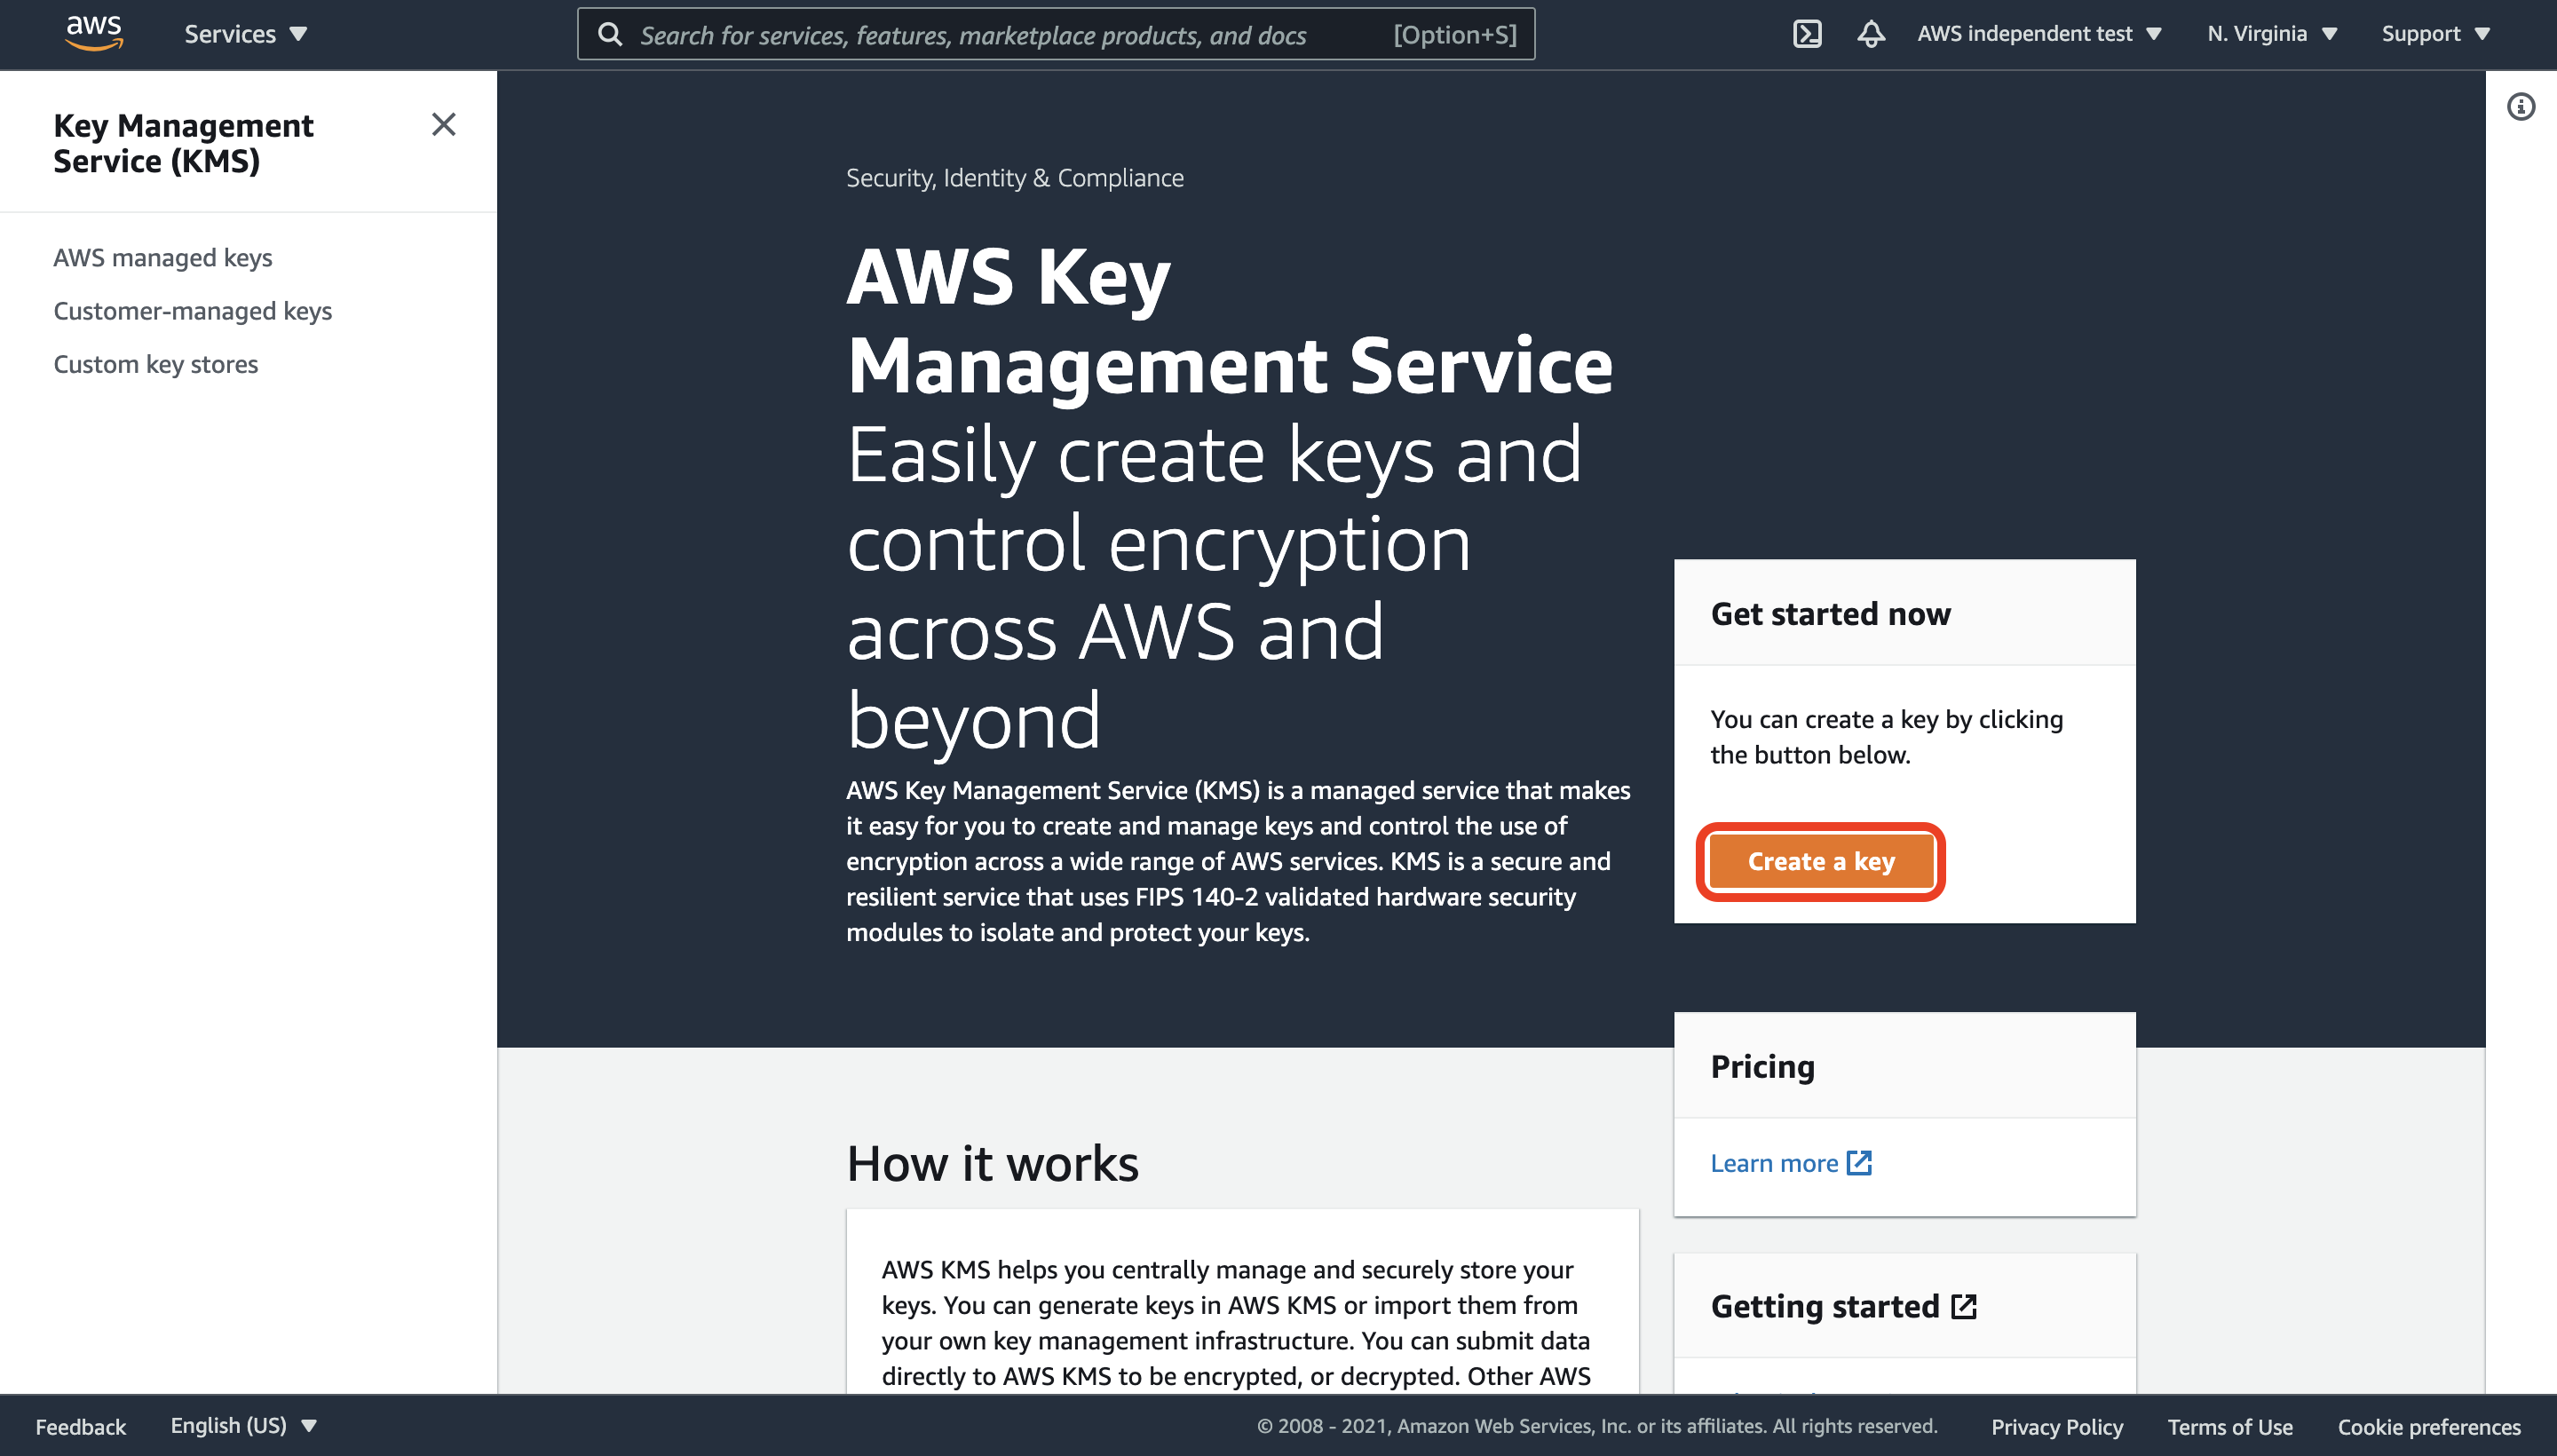 Press the Create a Key button on the AWS Key Management Service home page